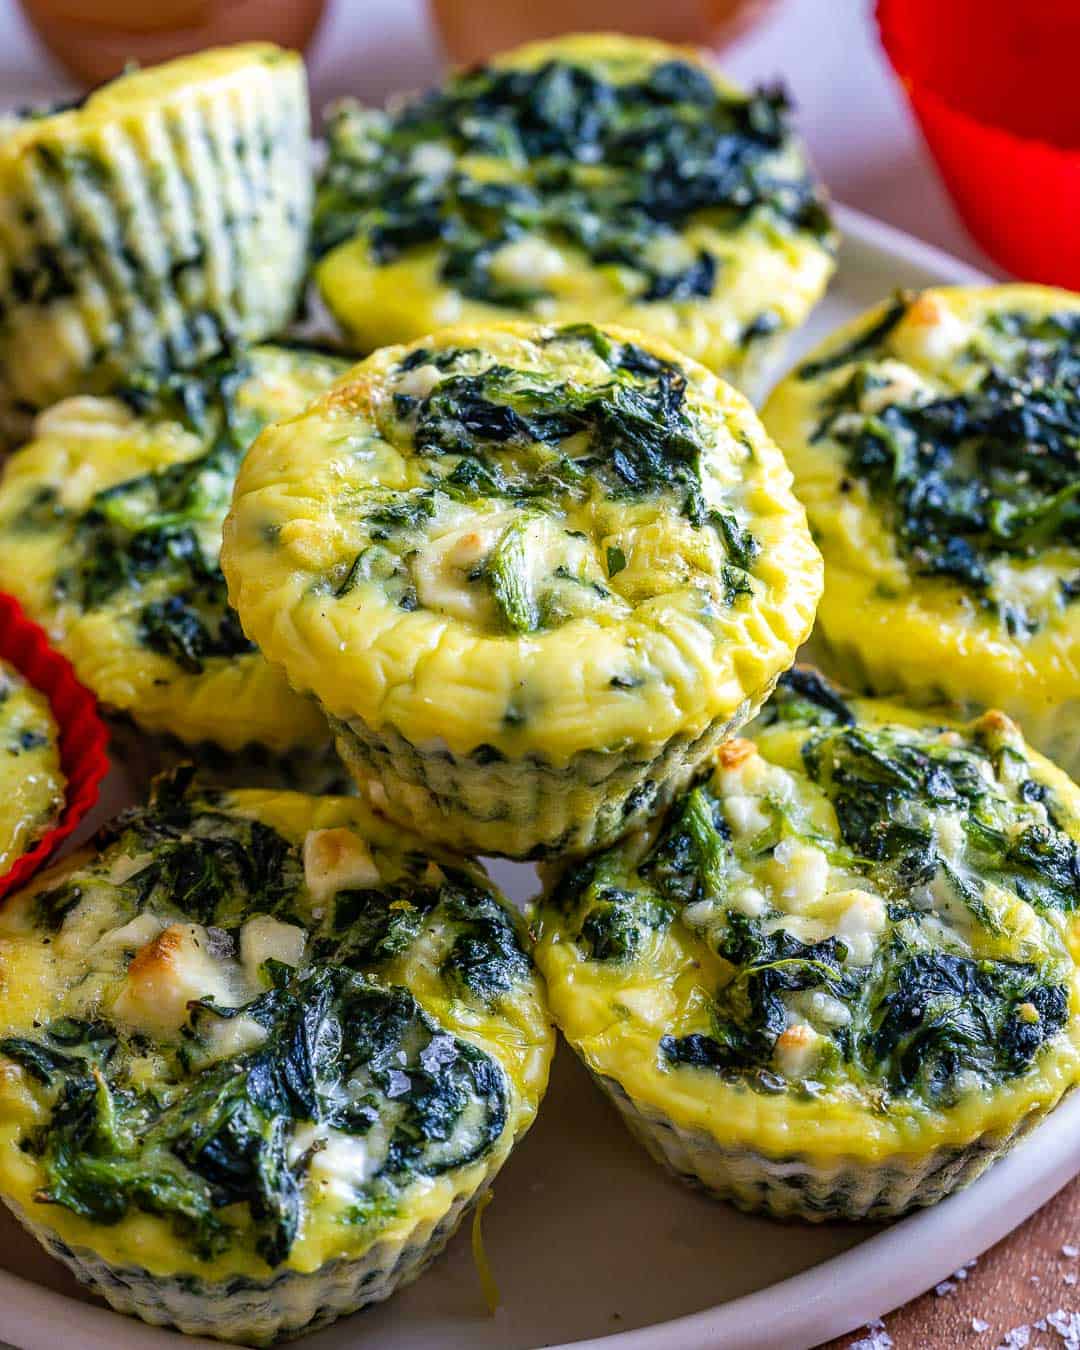 Feta and Spinach Baked Egg Cups - Healthy Fitness Meals